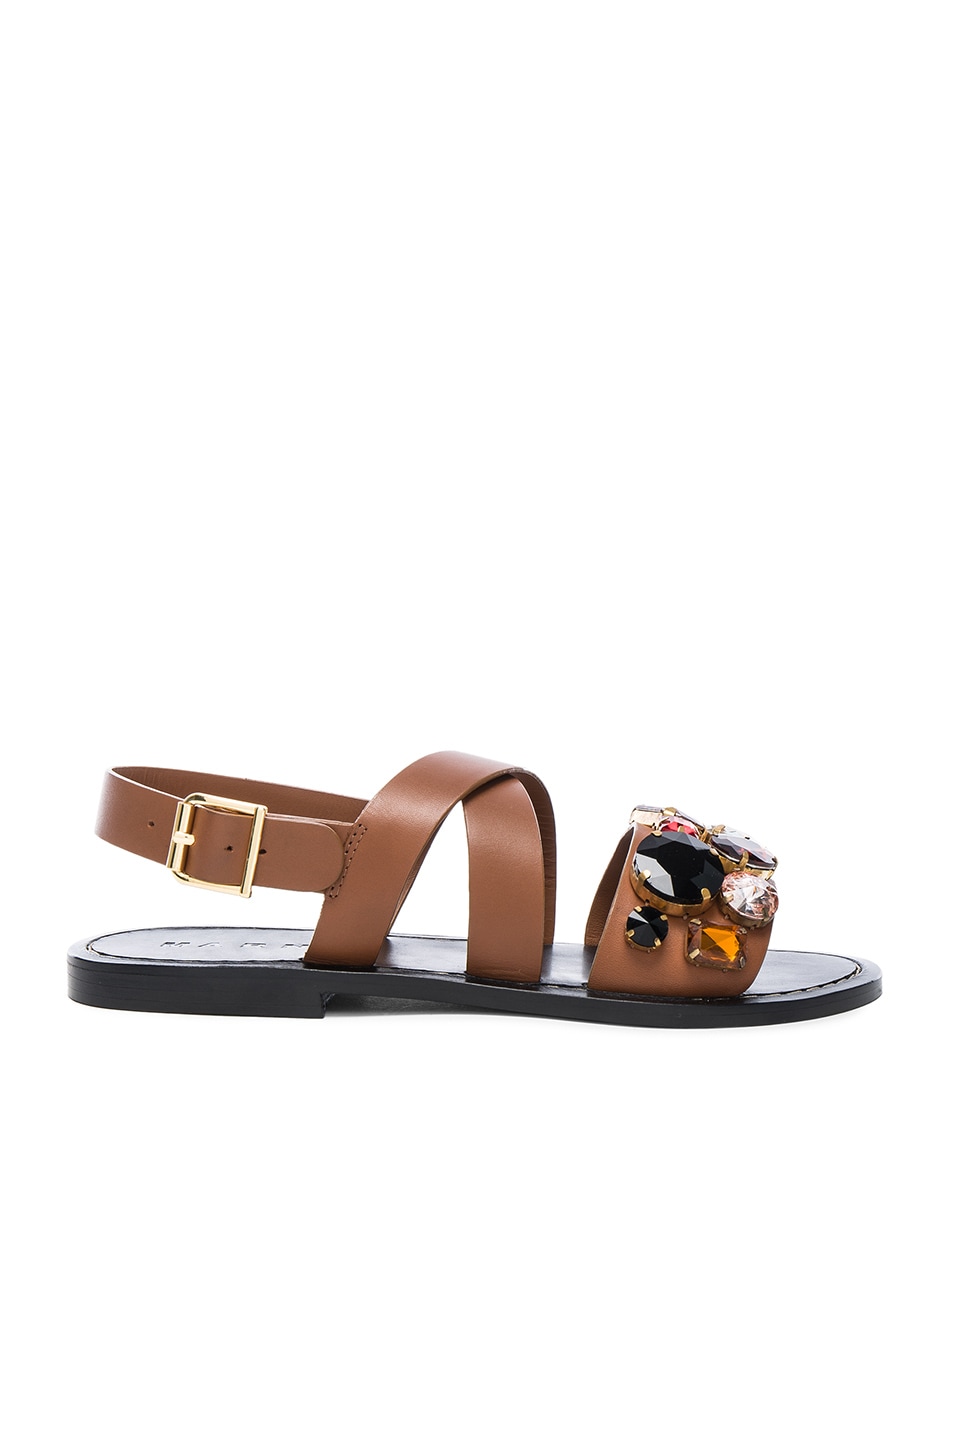 Image 1 of Marni Jewel Leather Sandals in Caramel